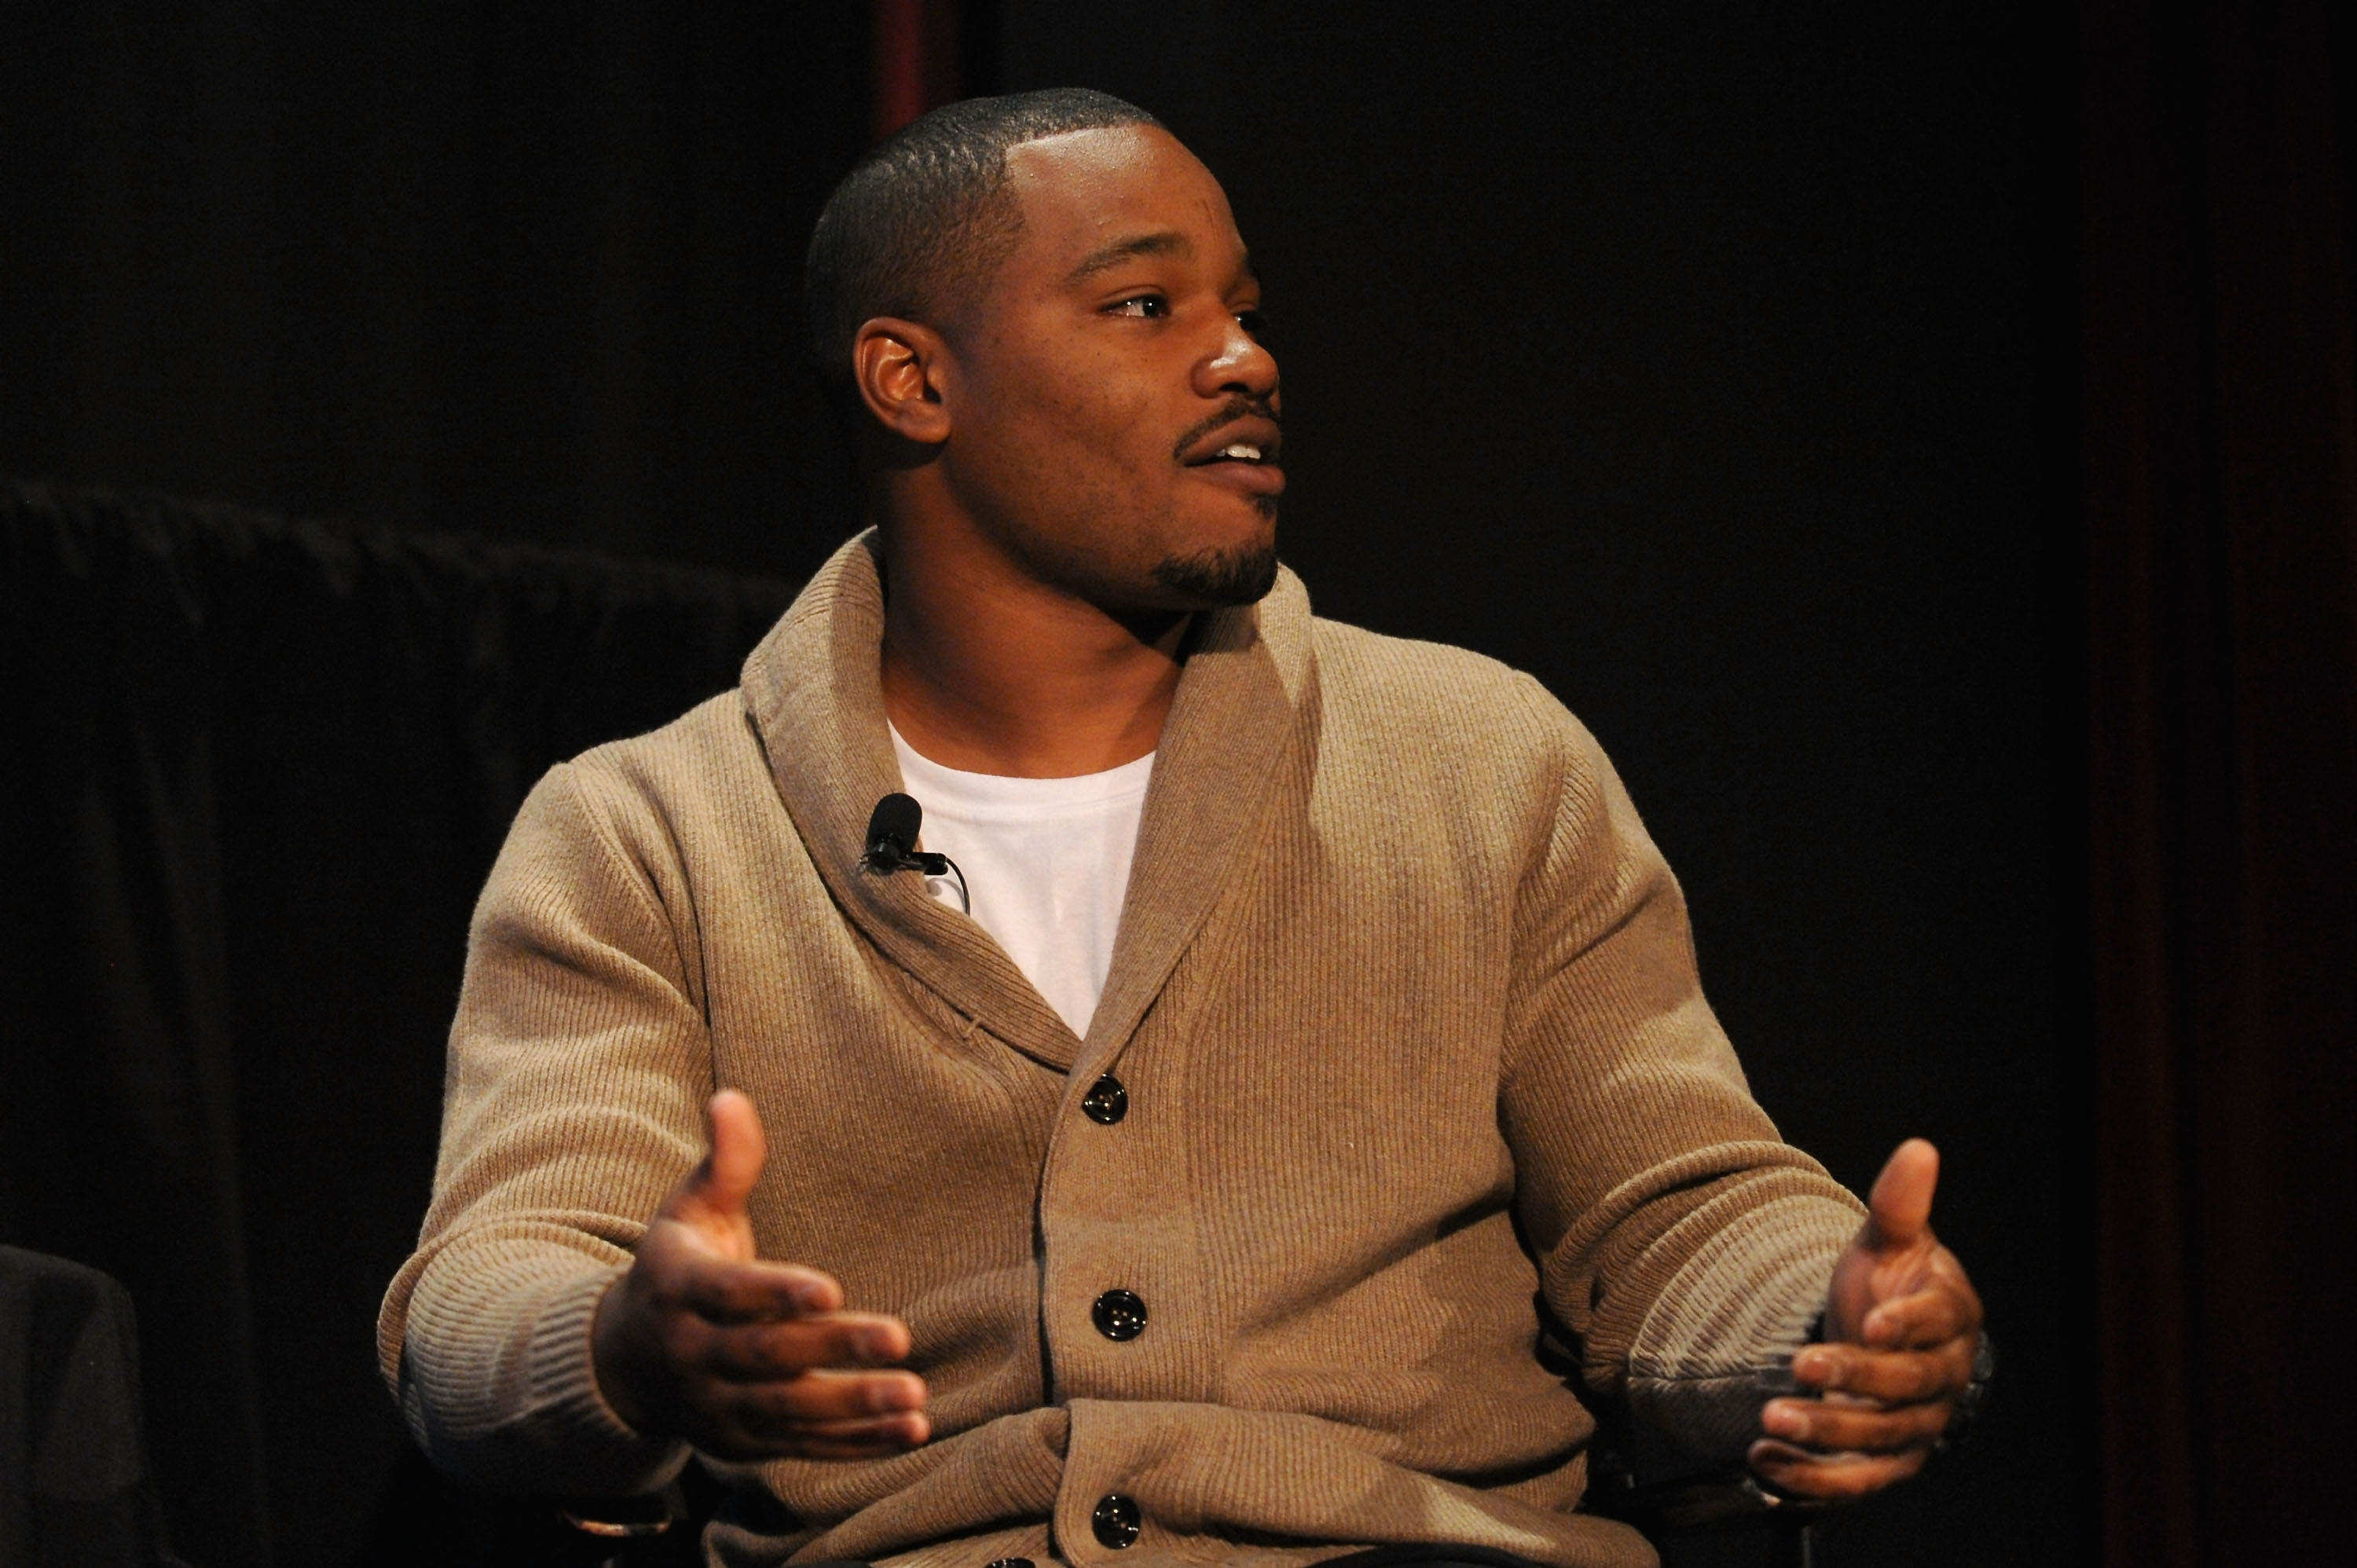 NEW YORK, NY - OCTOBER 10: Director Ryan Coogler attends The Golden State: Michael Chabon, Ryan Coogler, Miranda July, and Robert Towne Moderated by Deborah Teismanon during The New Yorker Festival 2014 on October 10, 2014 in New York City. (Photo by Andrew Toth/Getty Images for The New Yorker Festival)